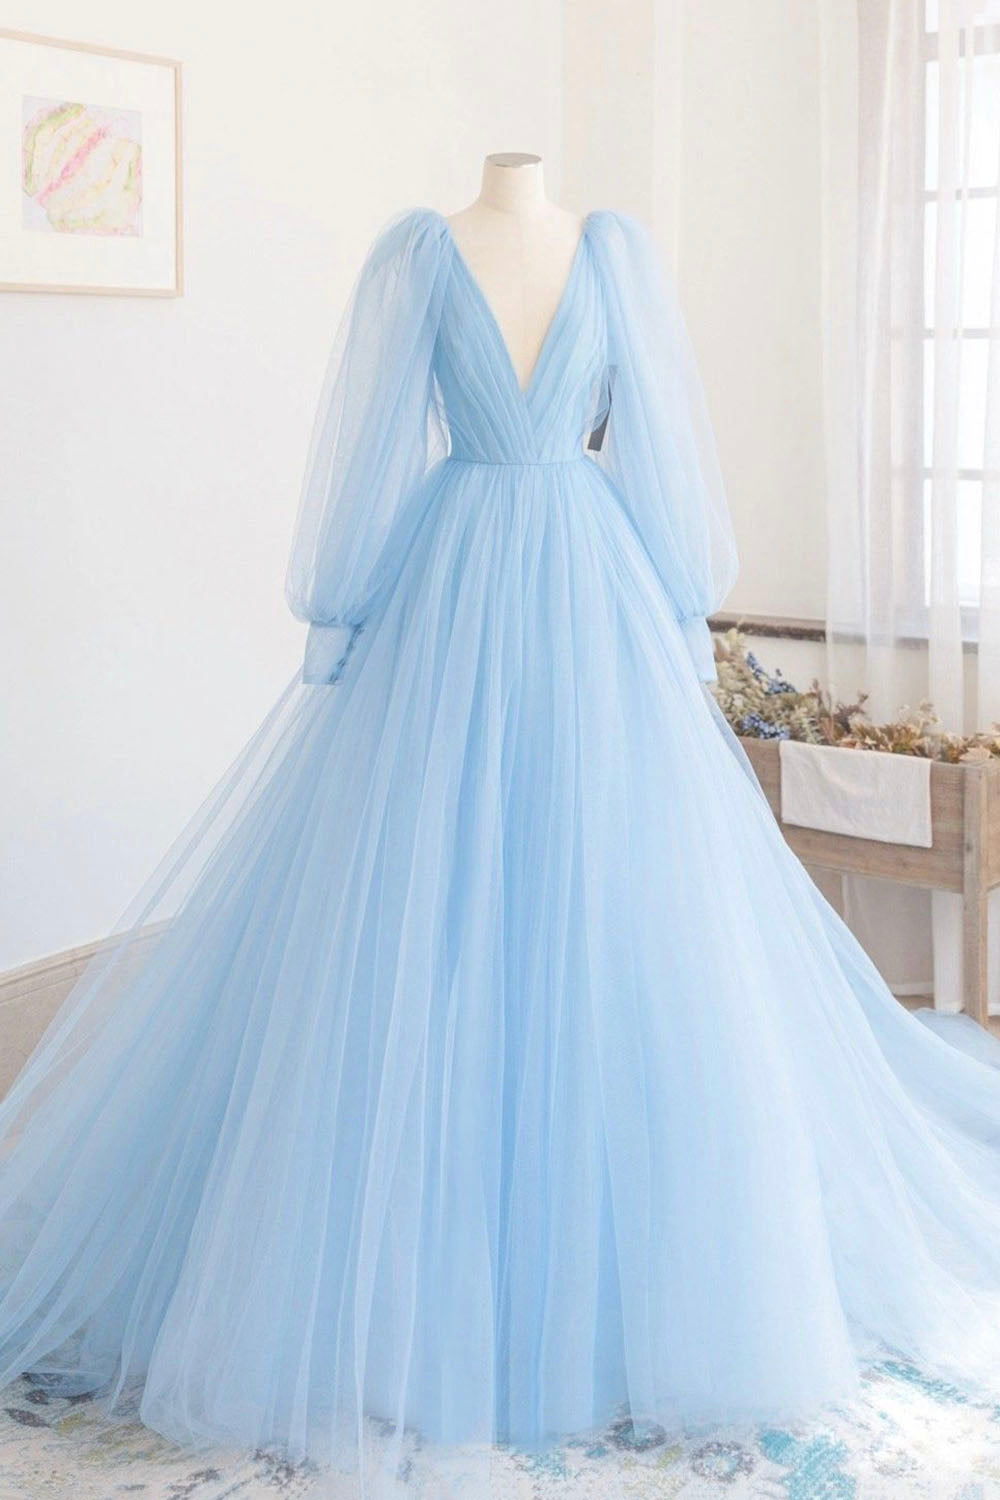 Blue V-Neck Tulle Long Prom Dress Outfits For Girls, A-Line Long Sleeve Evening Dress